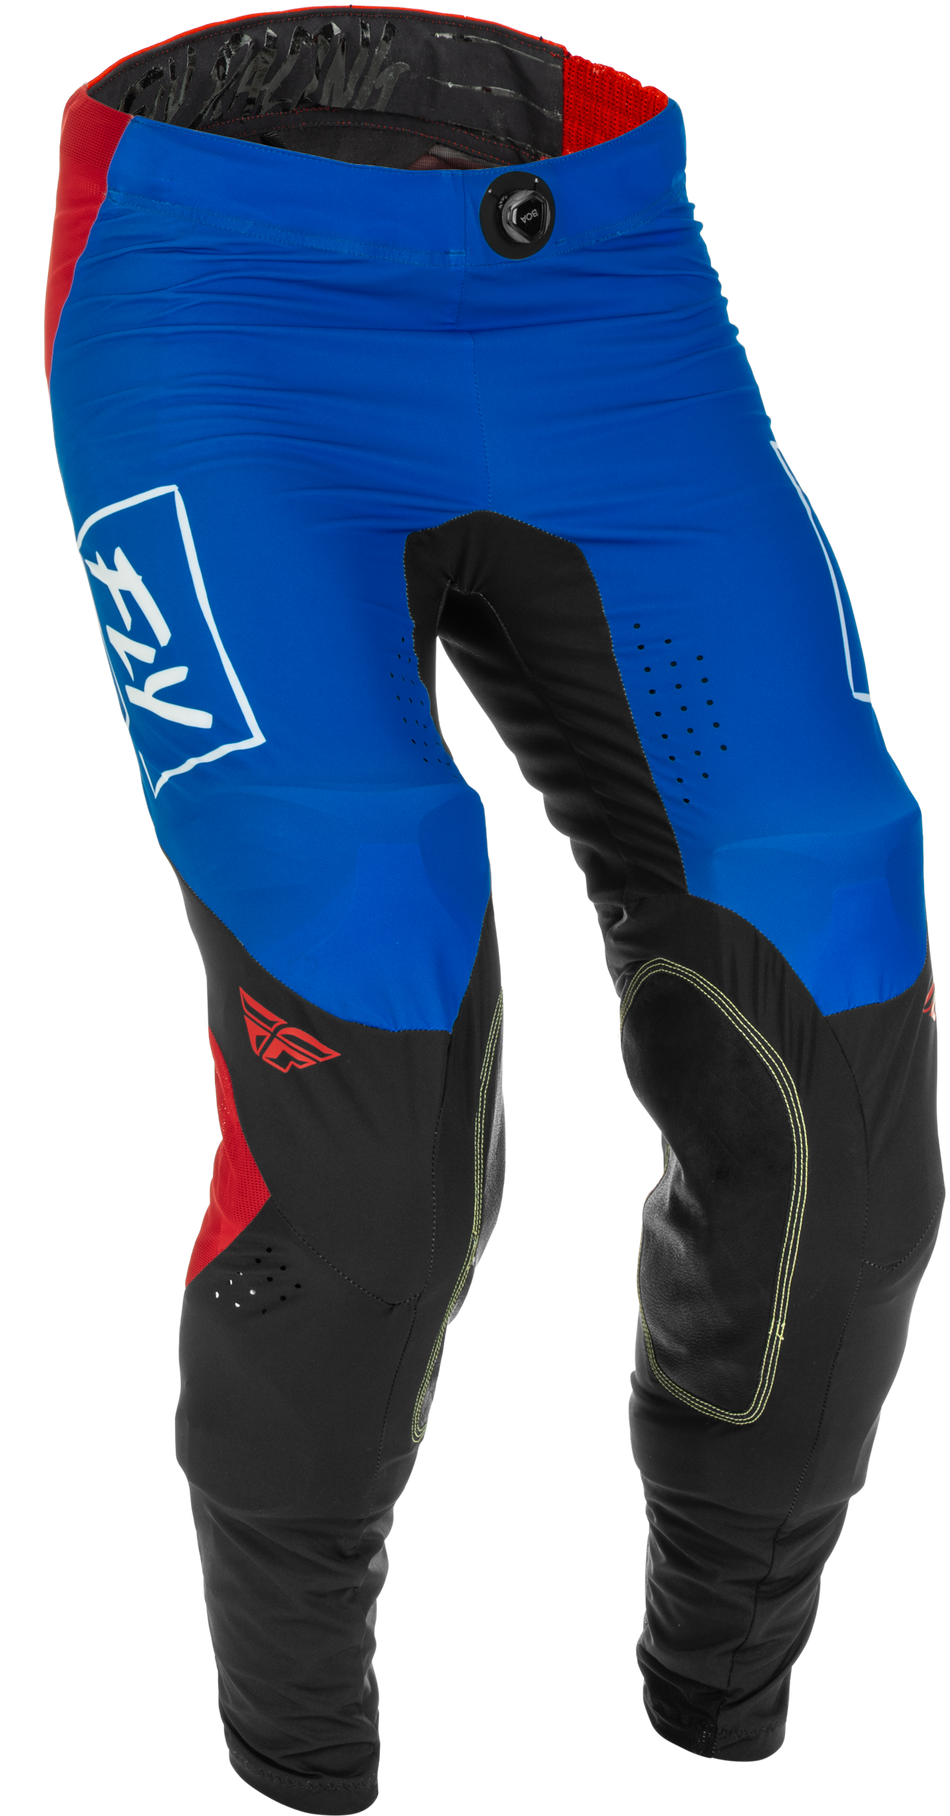 FLY RACING Lite Pants Red/White/Blue Size 30 375-73330